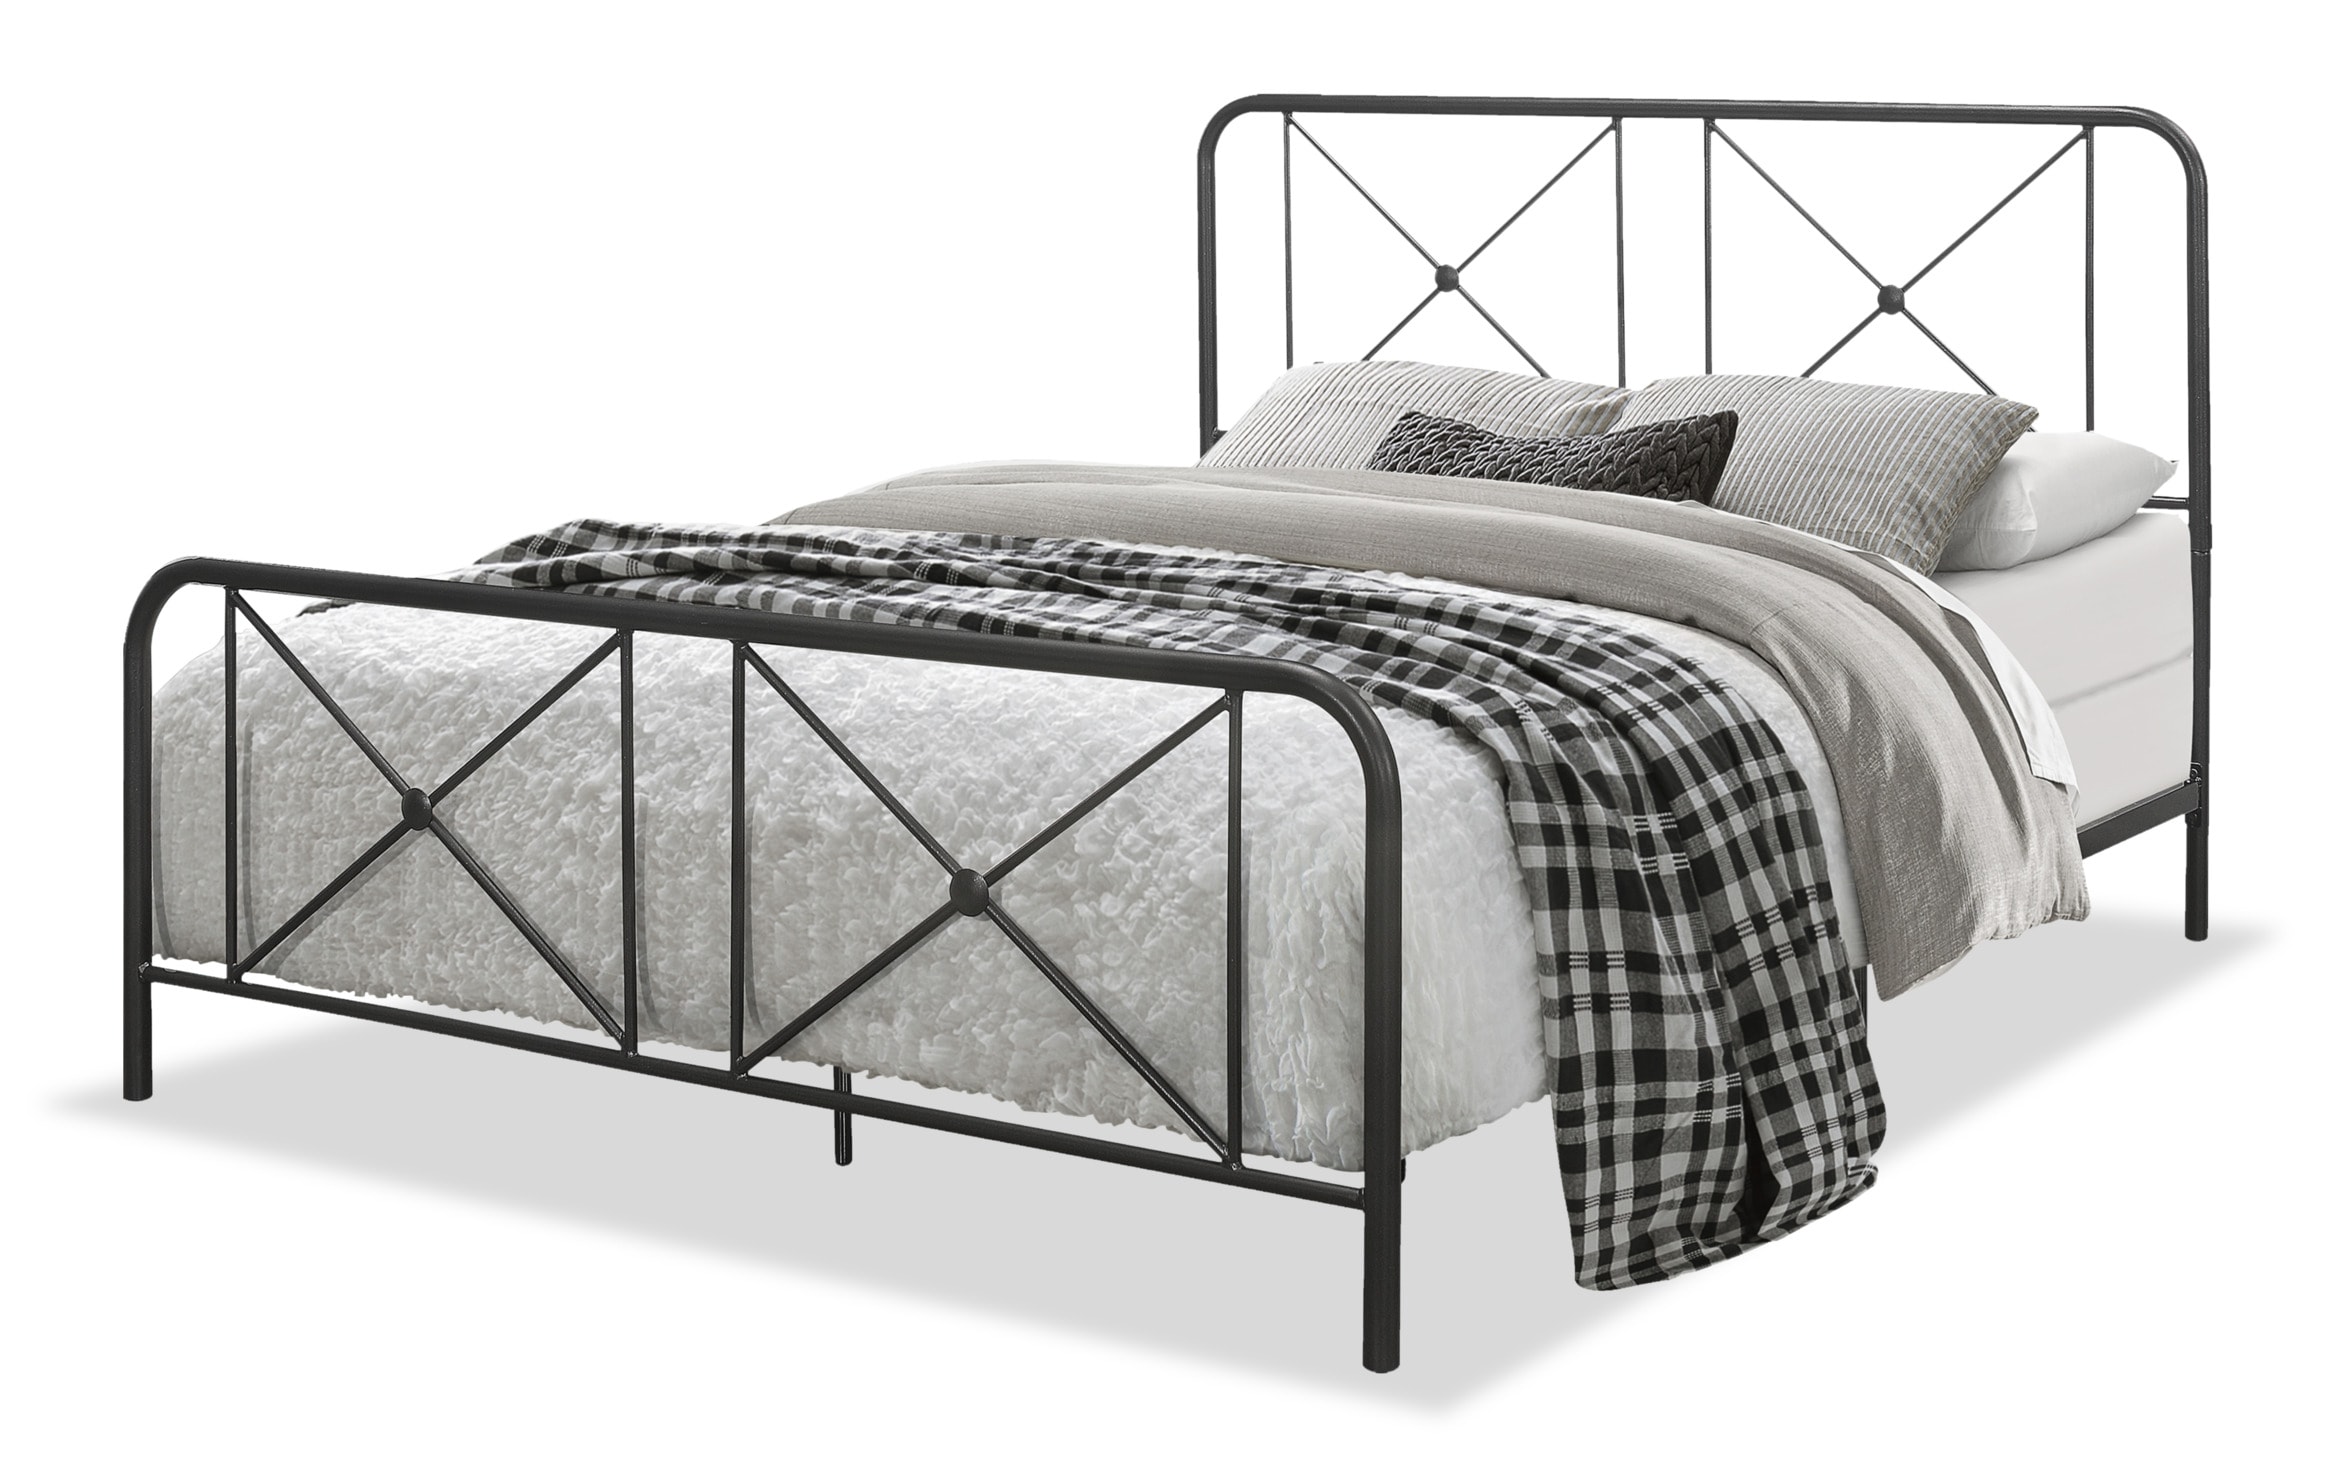 Rus Queen Metal Bed Bob S, How To Expand Metal Bed Frame